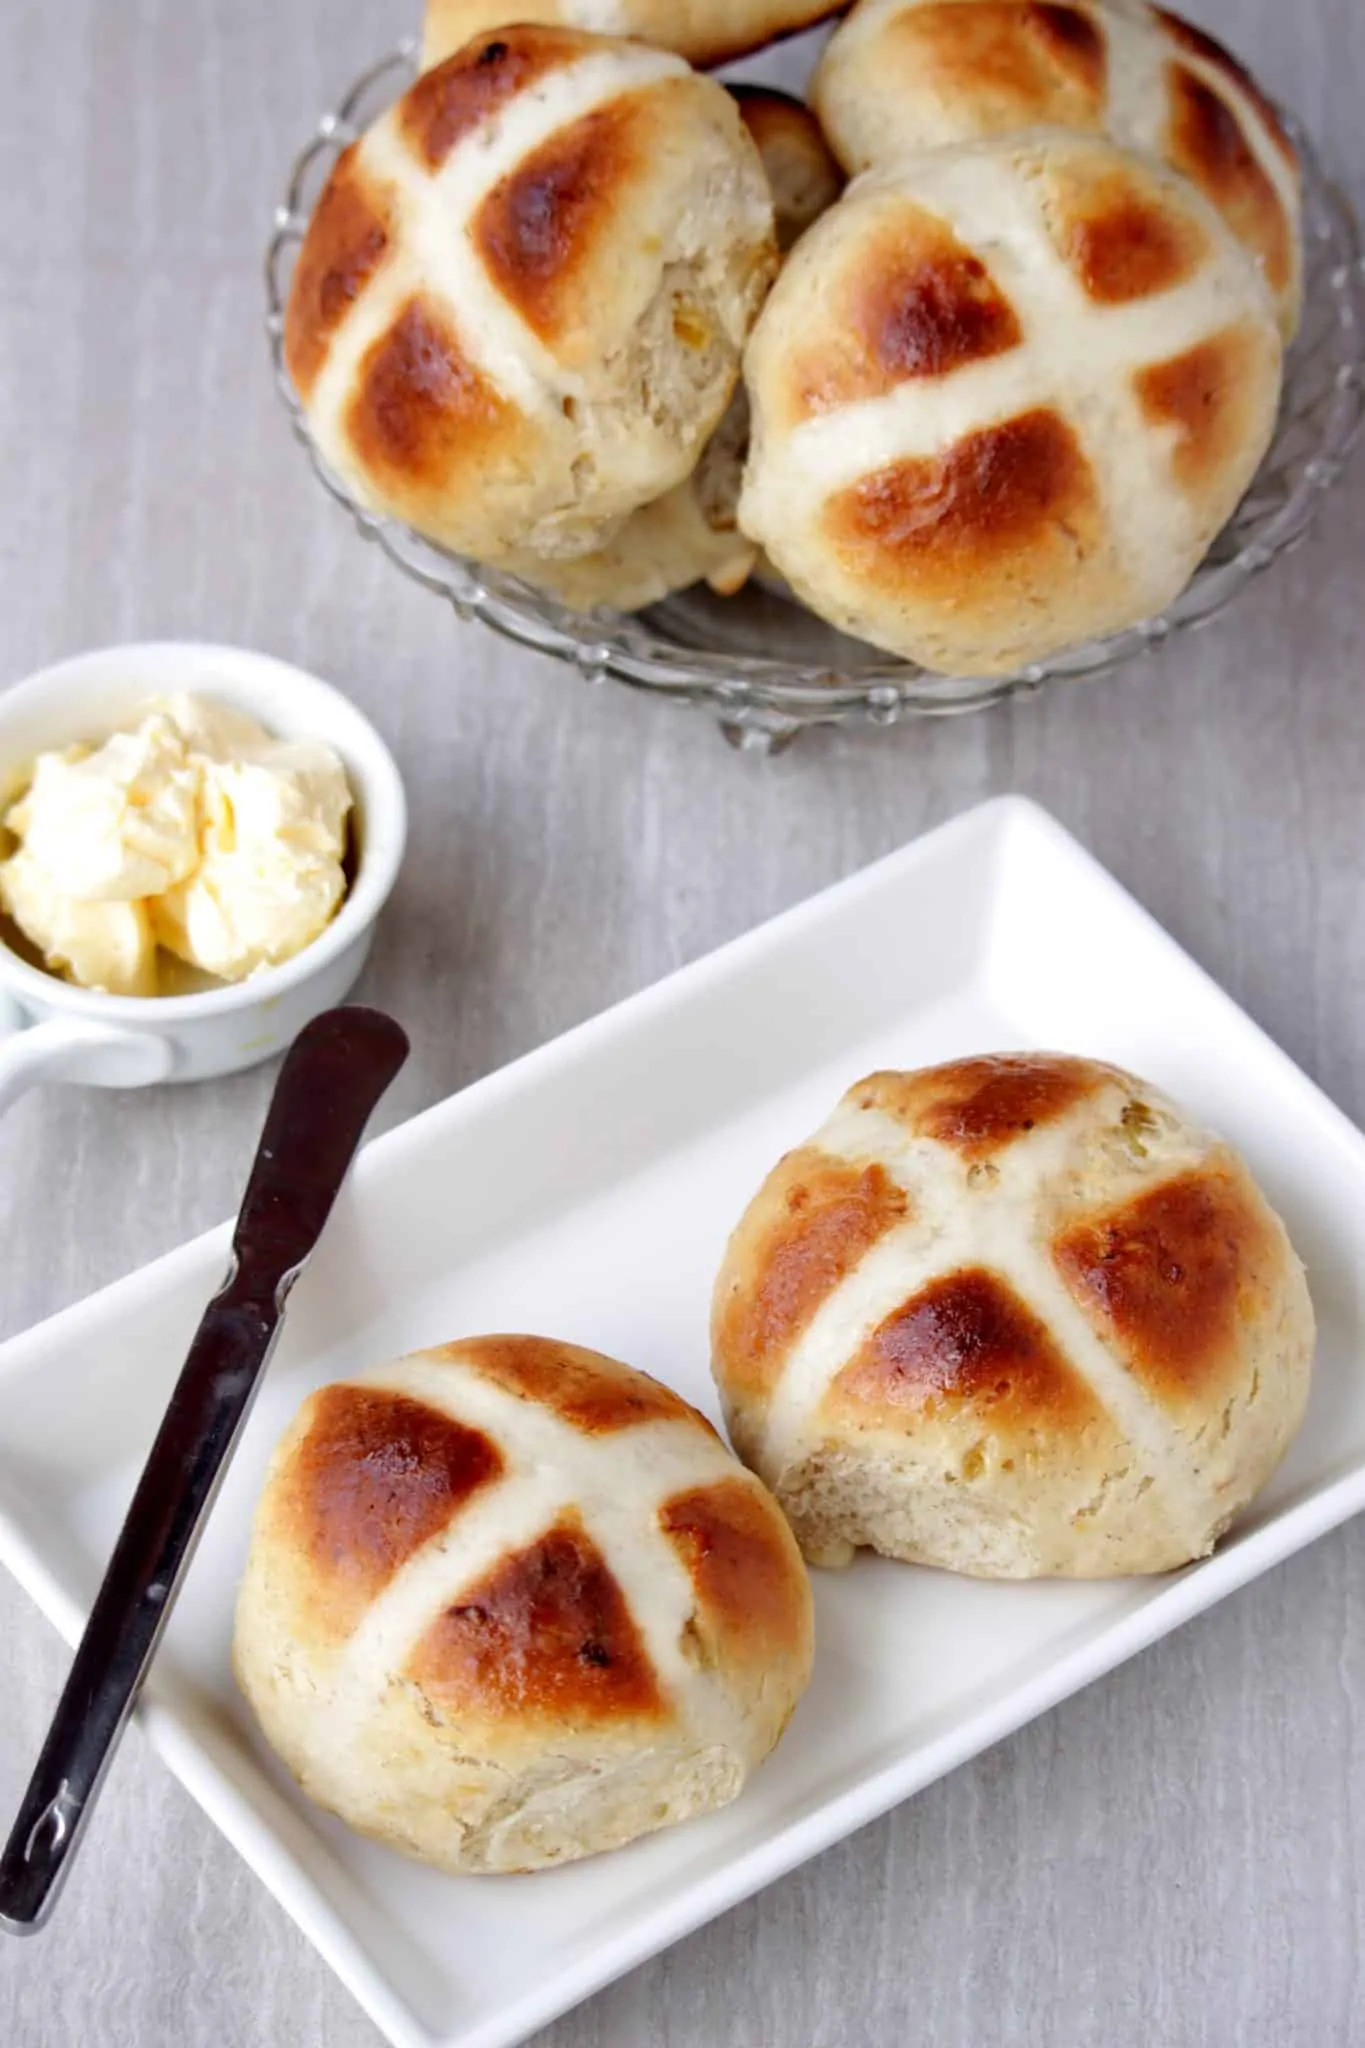 Hot Cross Buns in a white plate with butter on the side.